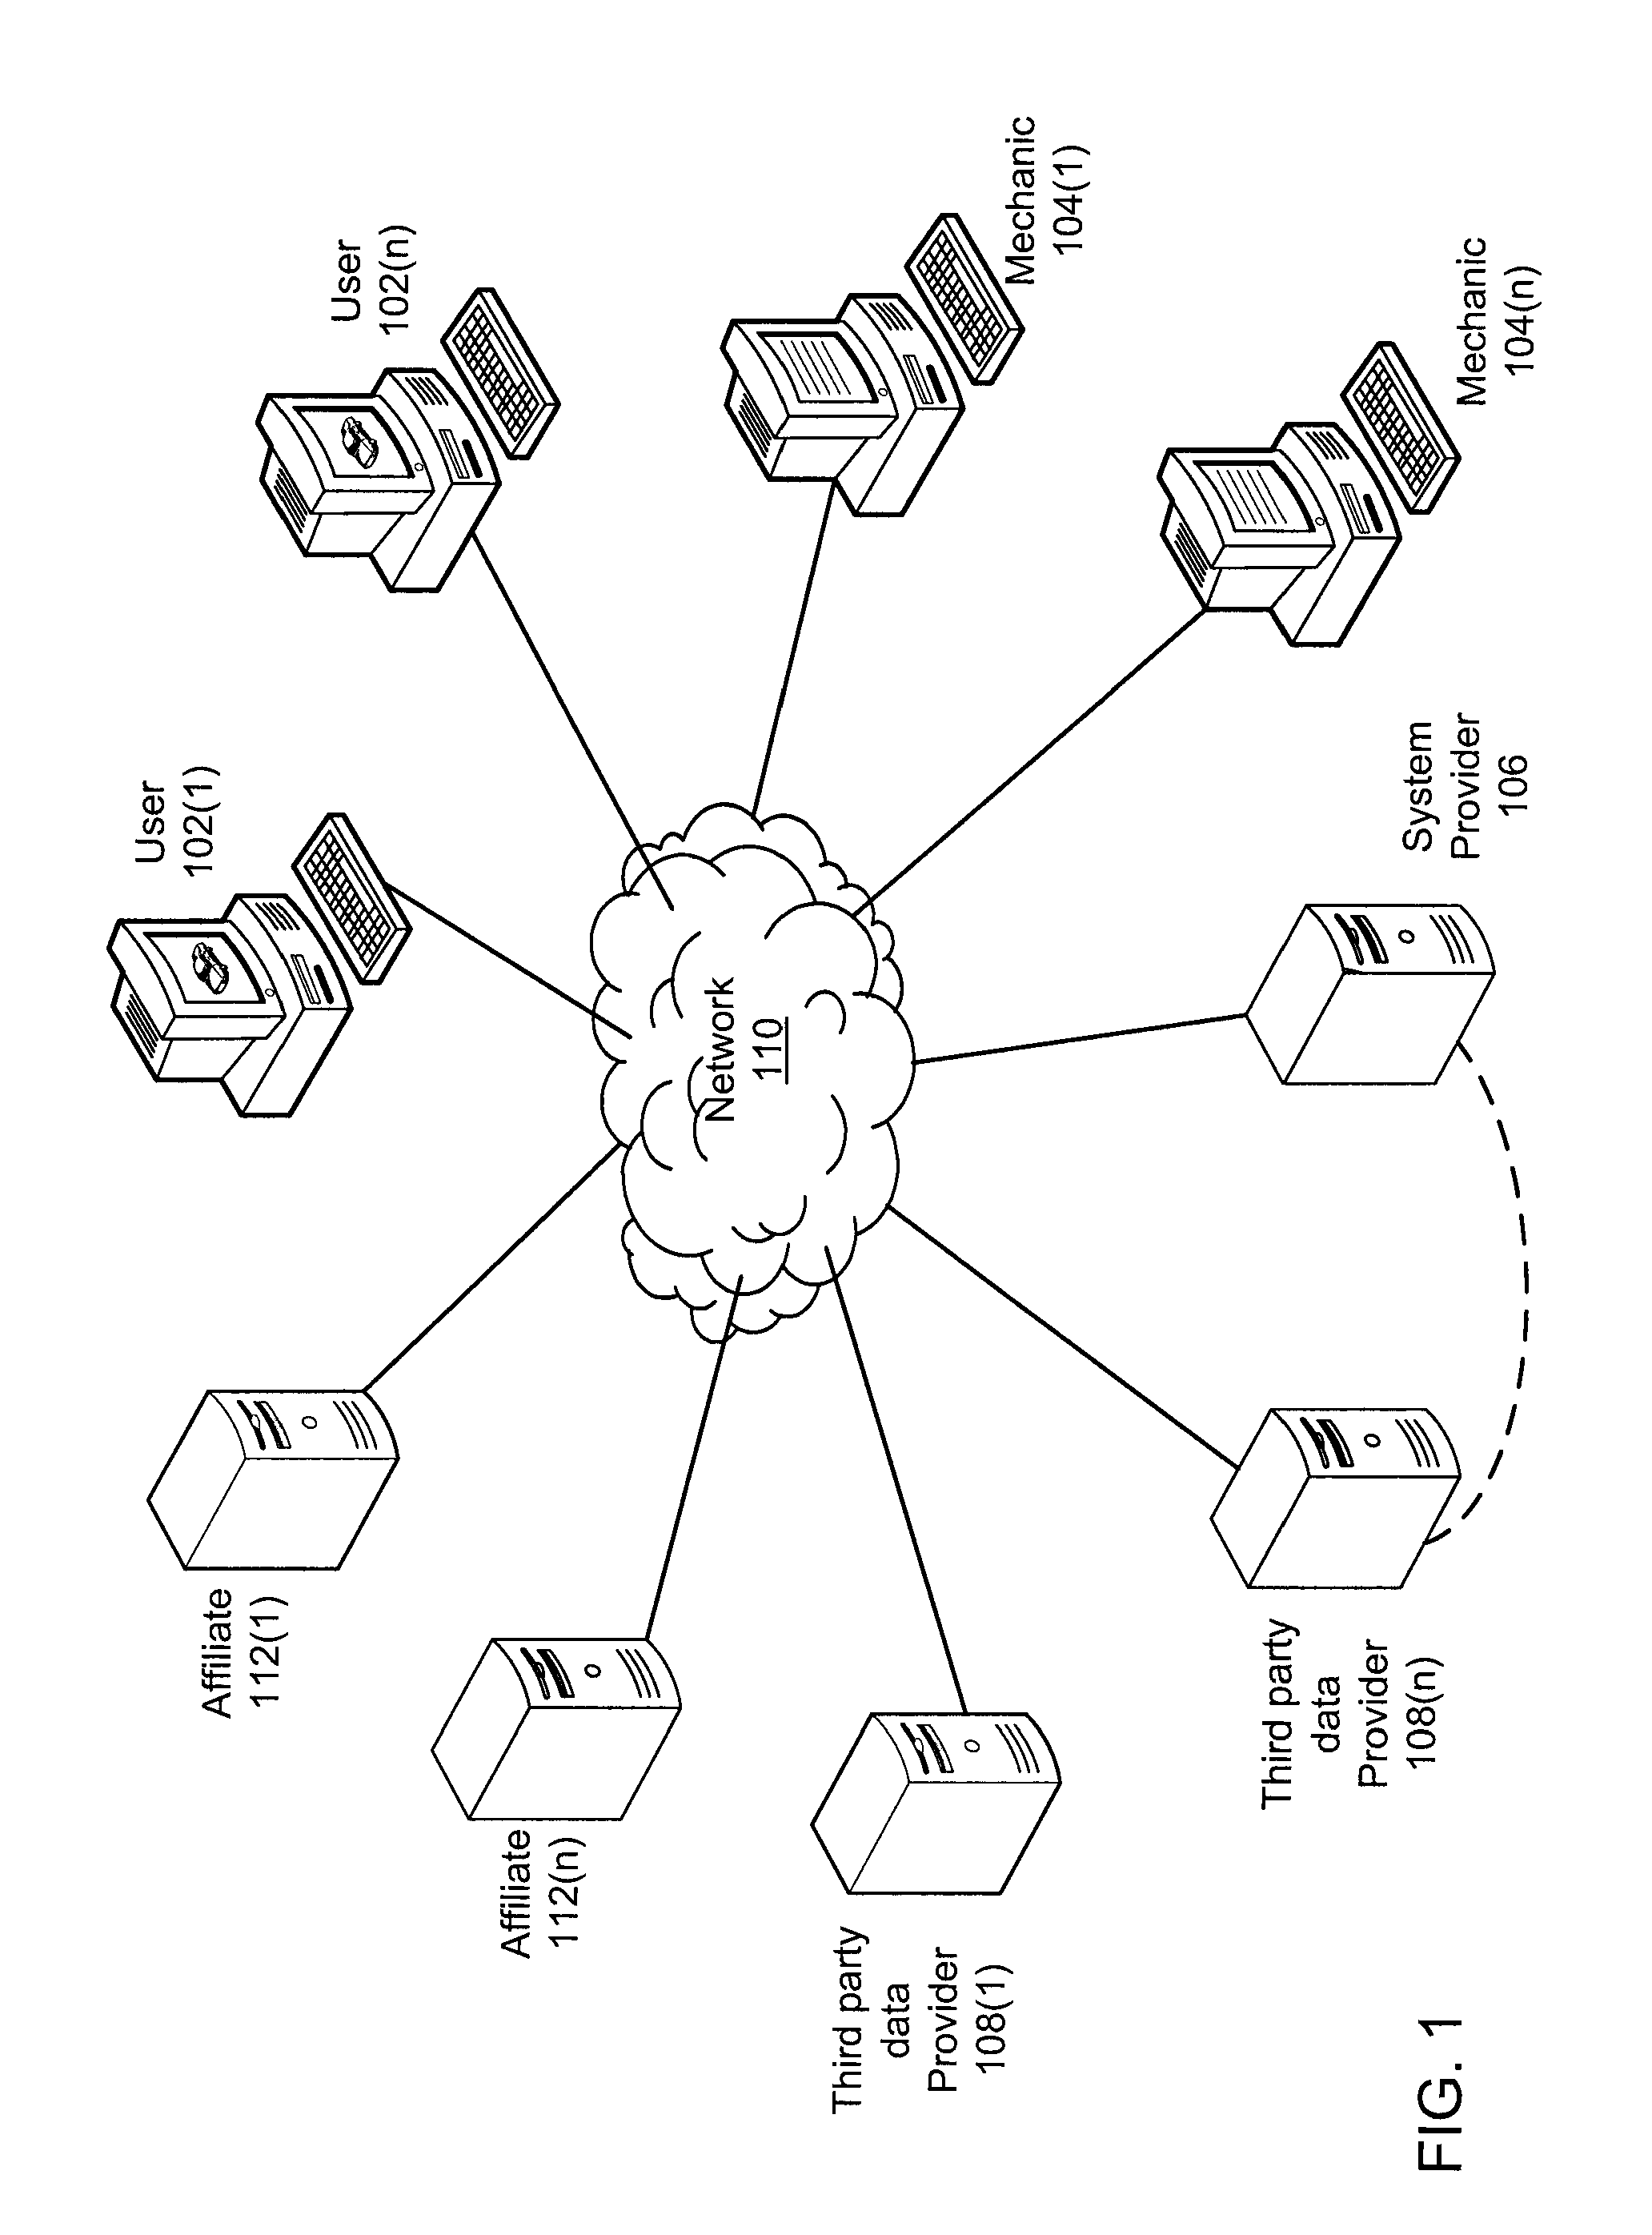 Automotive diagnostic and estimate system and method